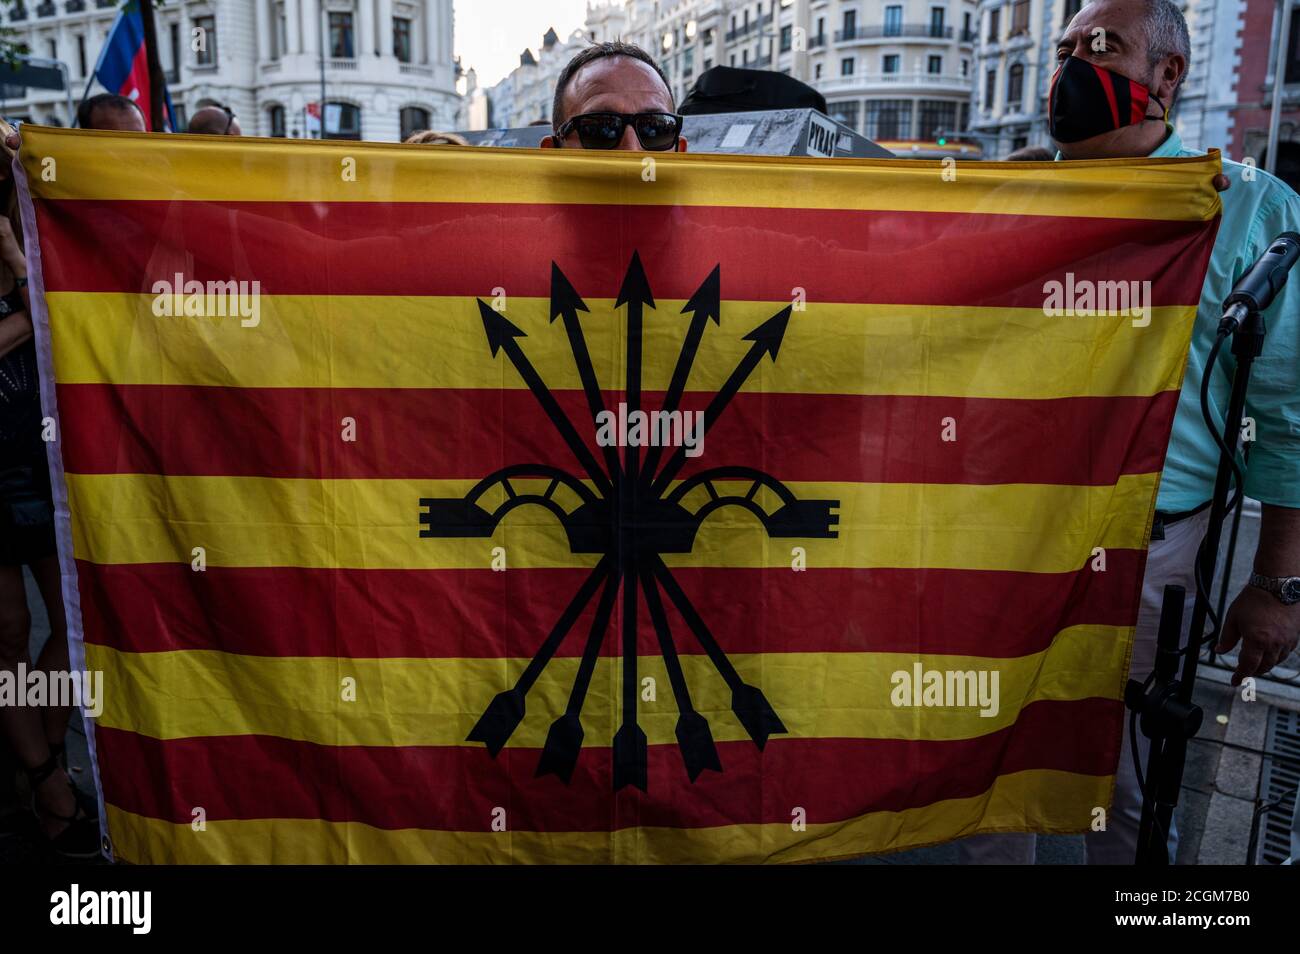 Madrid, Spain. 11th Sep, 2020. A supporter of far right wing holds a 'Phalanx' flag during a protest against the Blanquerna case coinciding with the celebration of the 'Diada' National Day in Catalonia. Credit: Marcos del Mazo/Alamy Live News Stock Photo